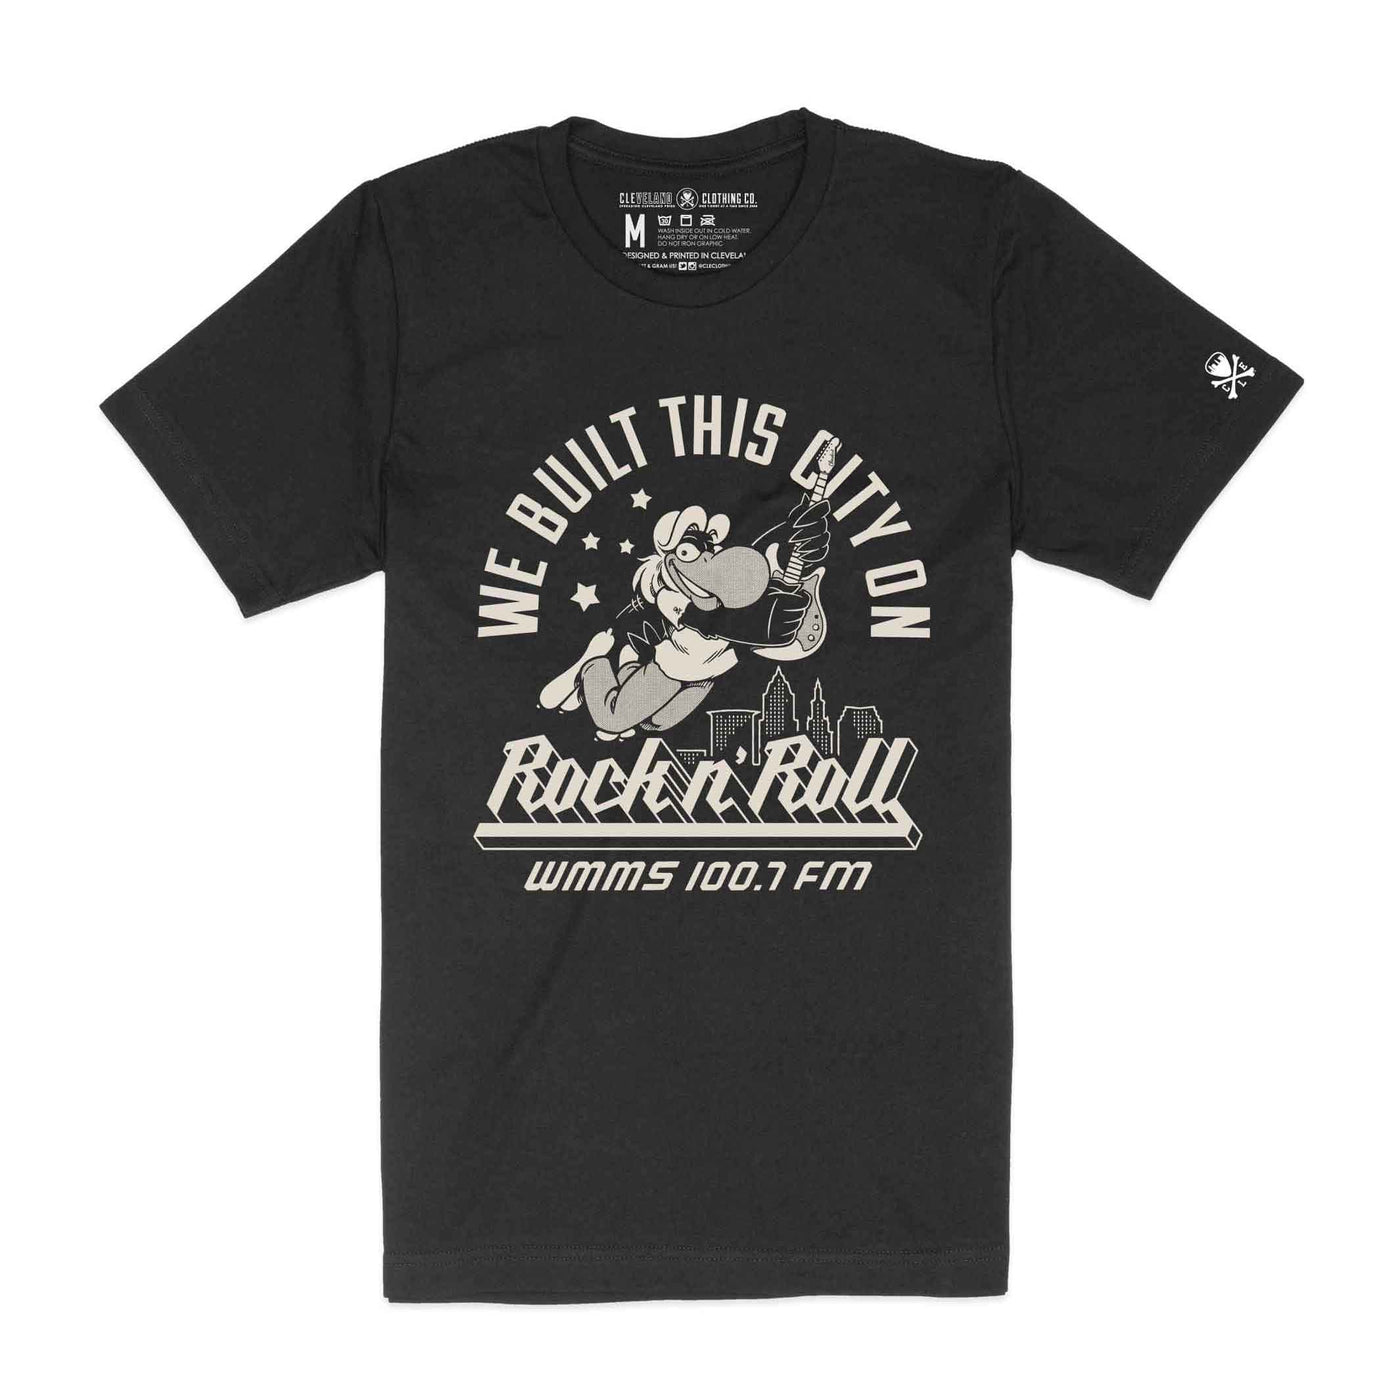 WMMS 'We Built This City' - Unisex Crew T-Shirt *OFFICIALLY LICENSED